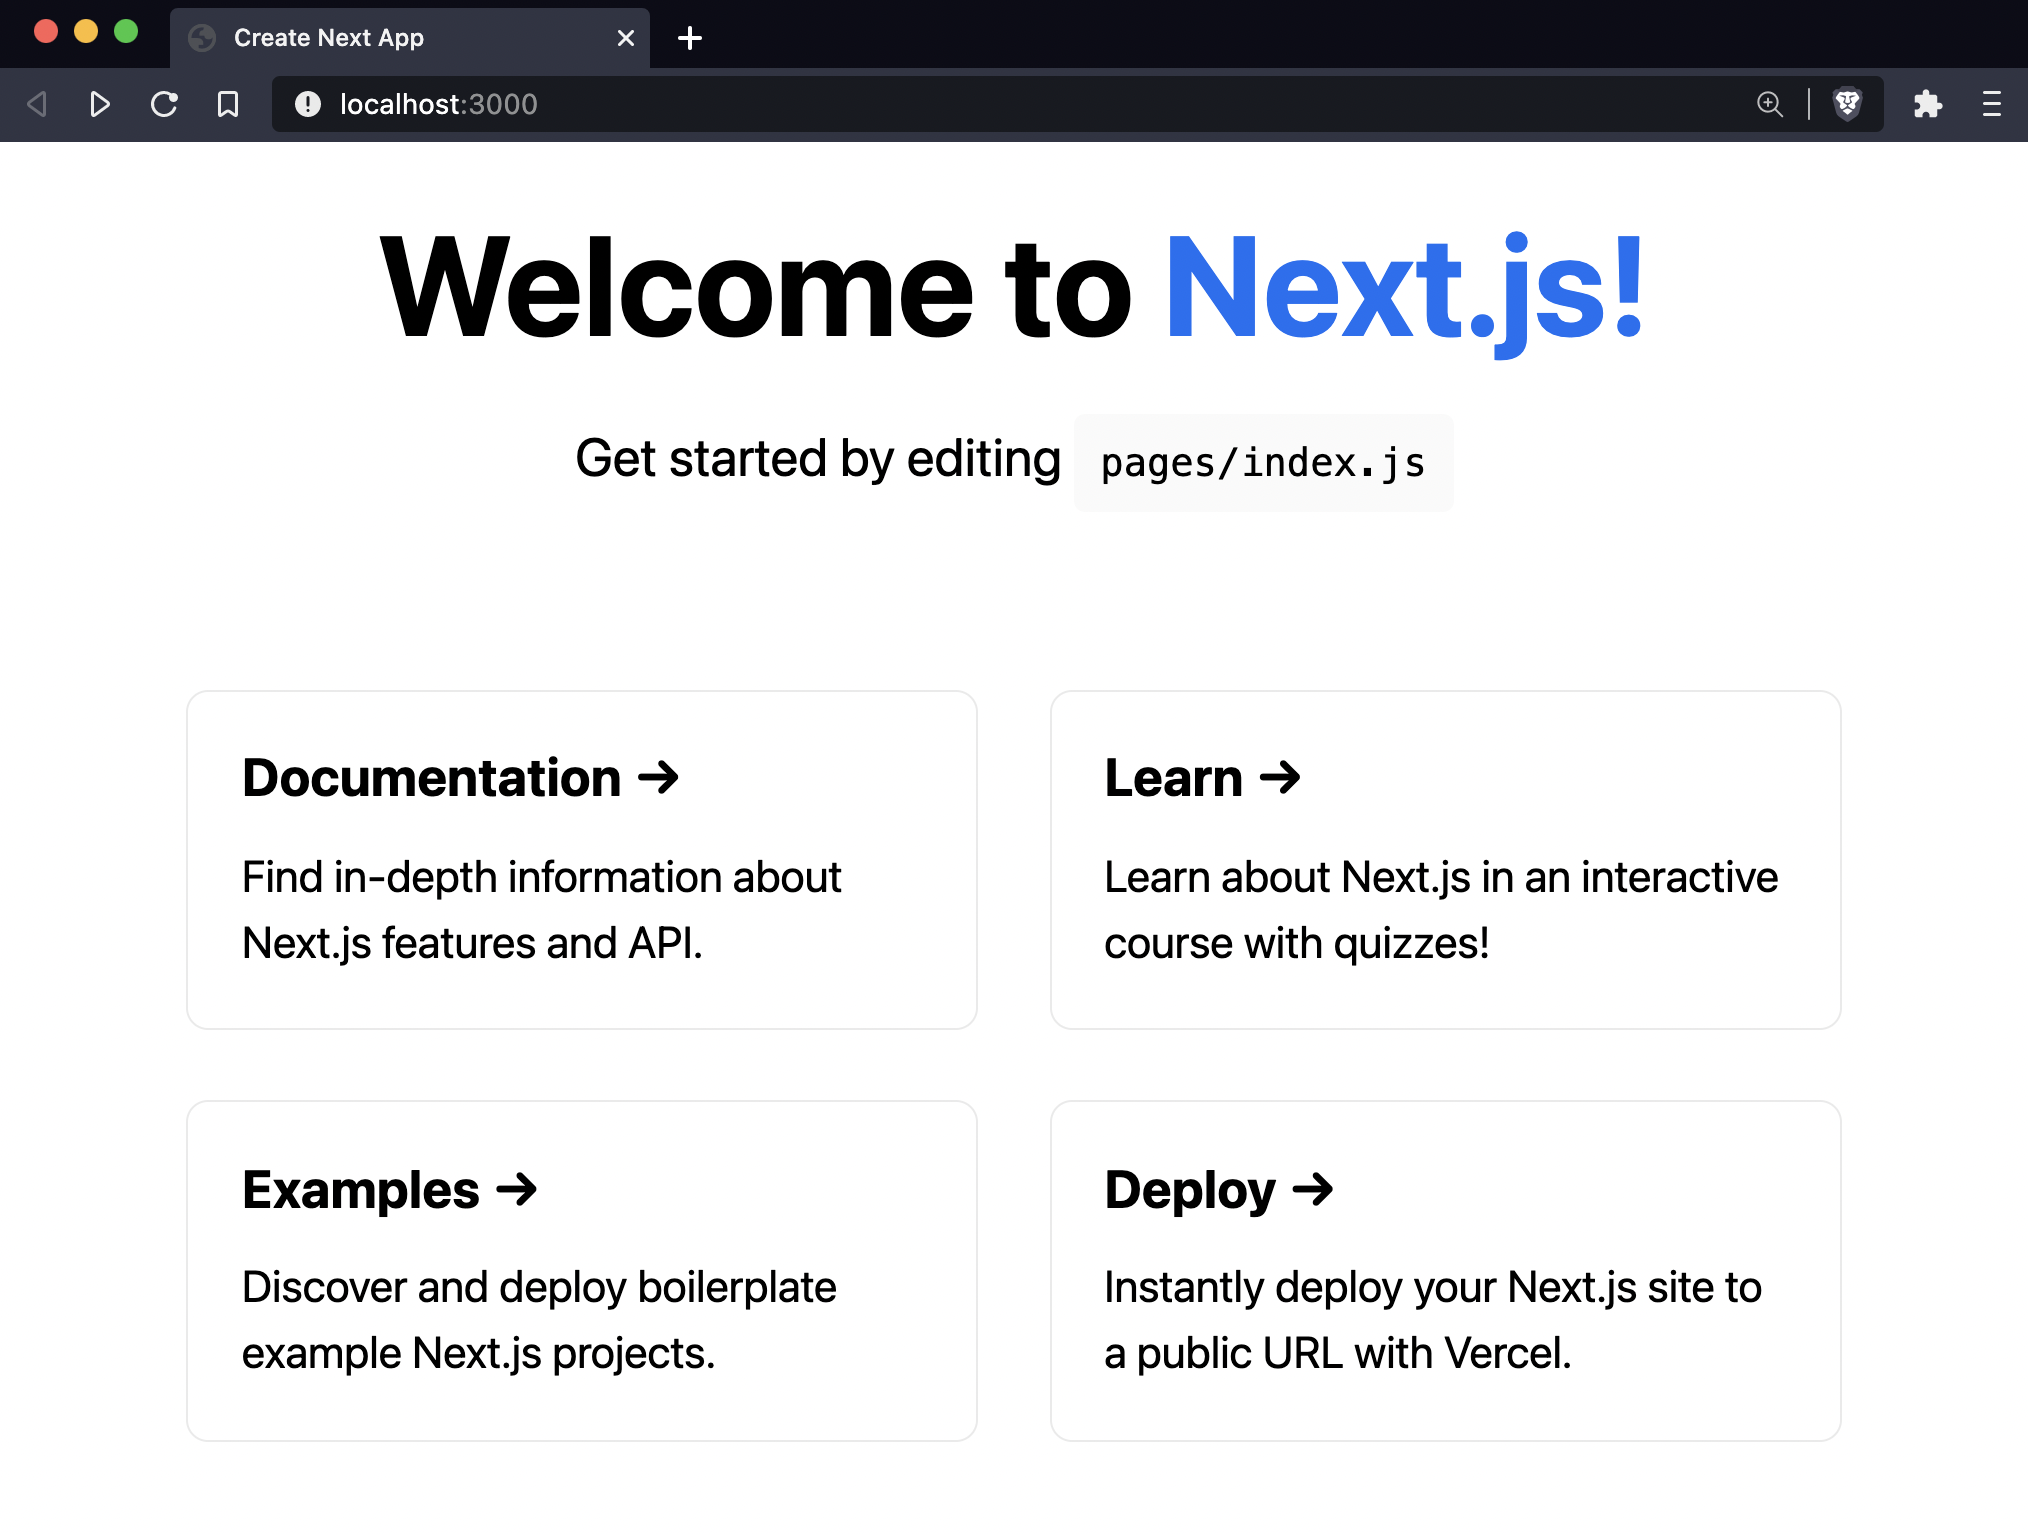 A browser showing the Home page of the default Next.js app